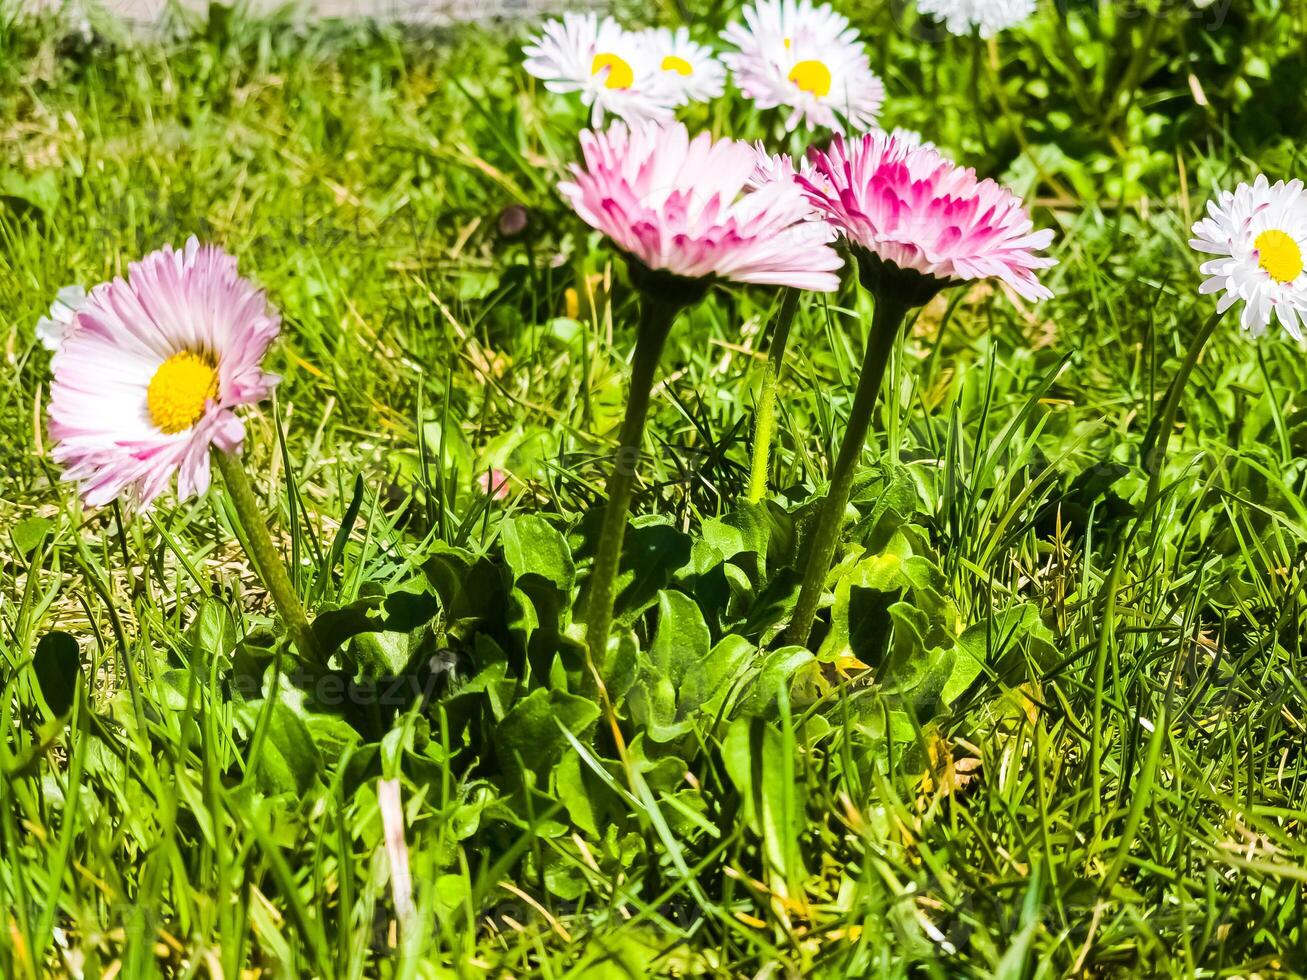 Delicate white and pink Daisies or Bellis perennis flowers on green grass. Lawn Daisy blooms in spring photo